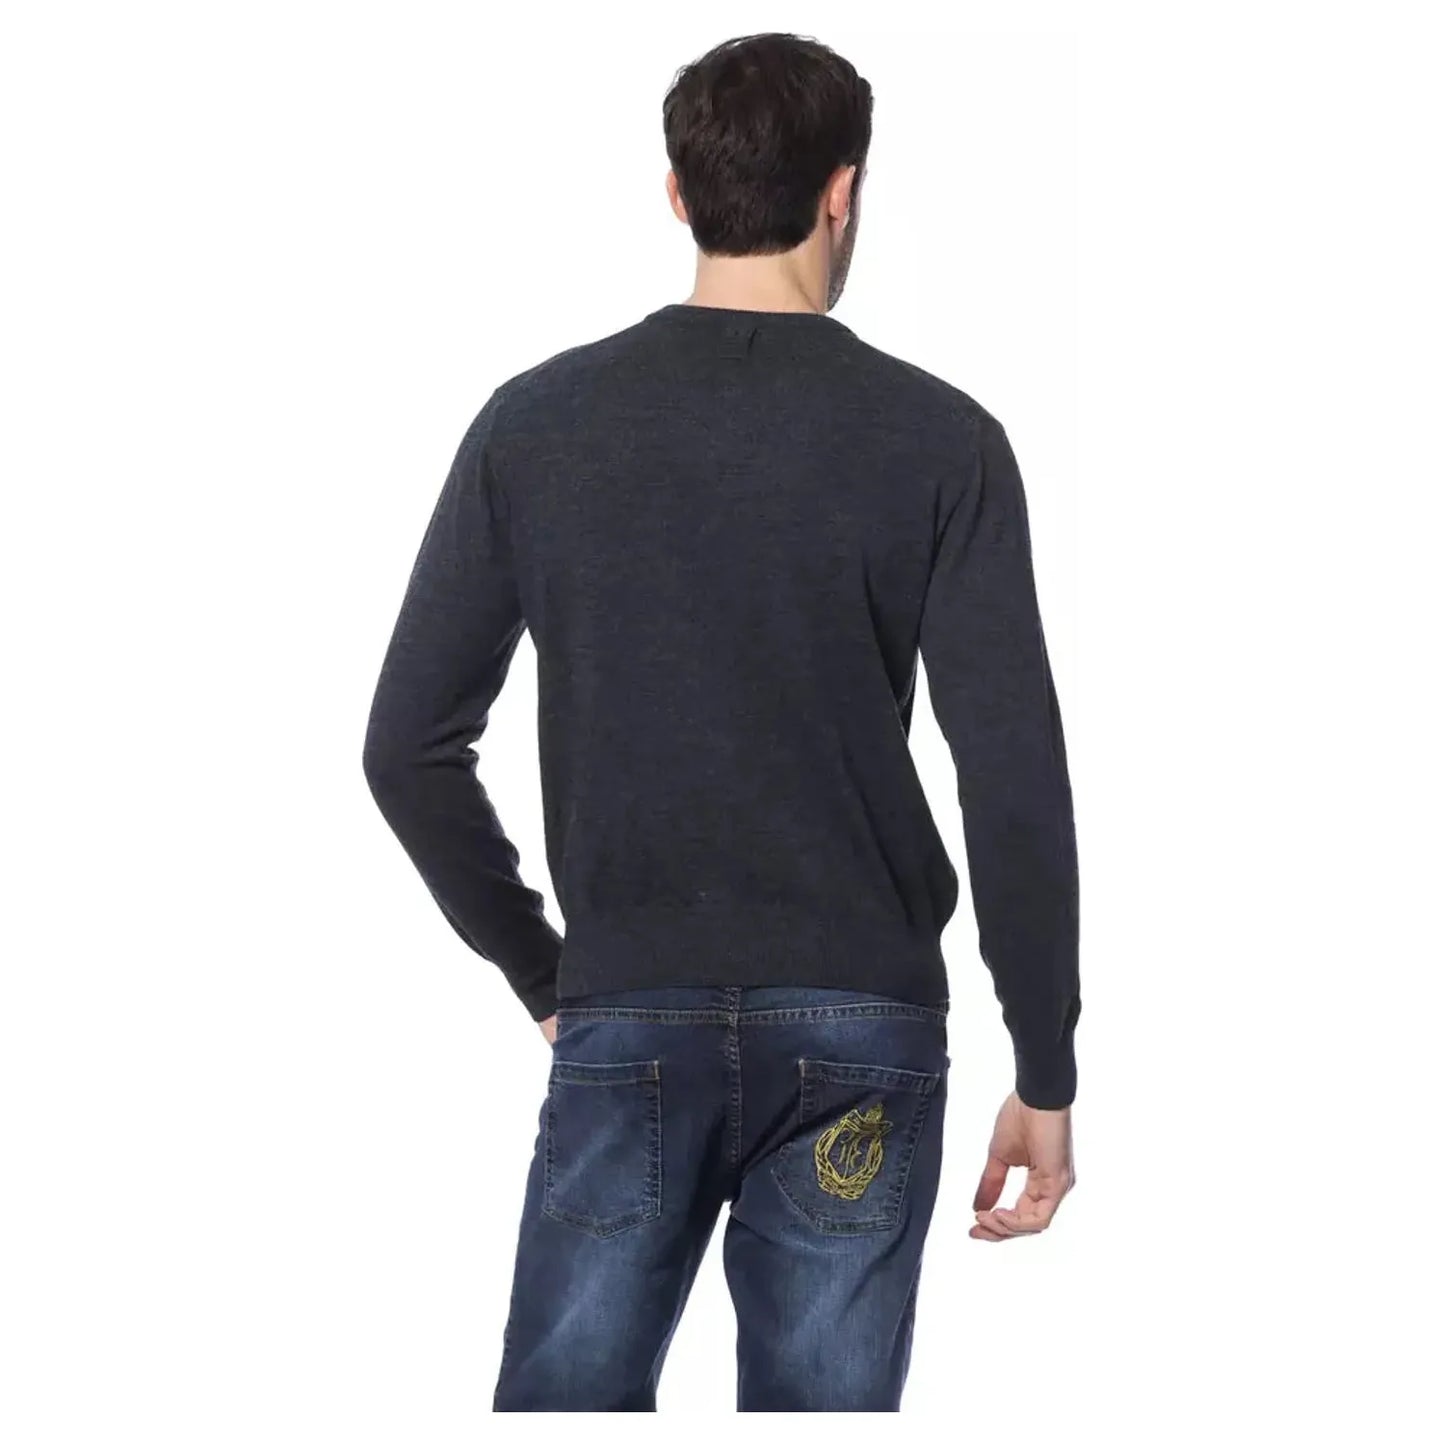 Billionaire Italian Couture Embroidered Merino Wool Crew Neck Sweater gri-sc-dk-grey-sweater stock_product_image_10489_1320598106-13-d7623608-f2f.webp